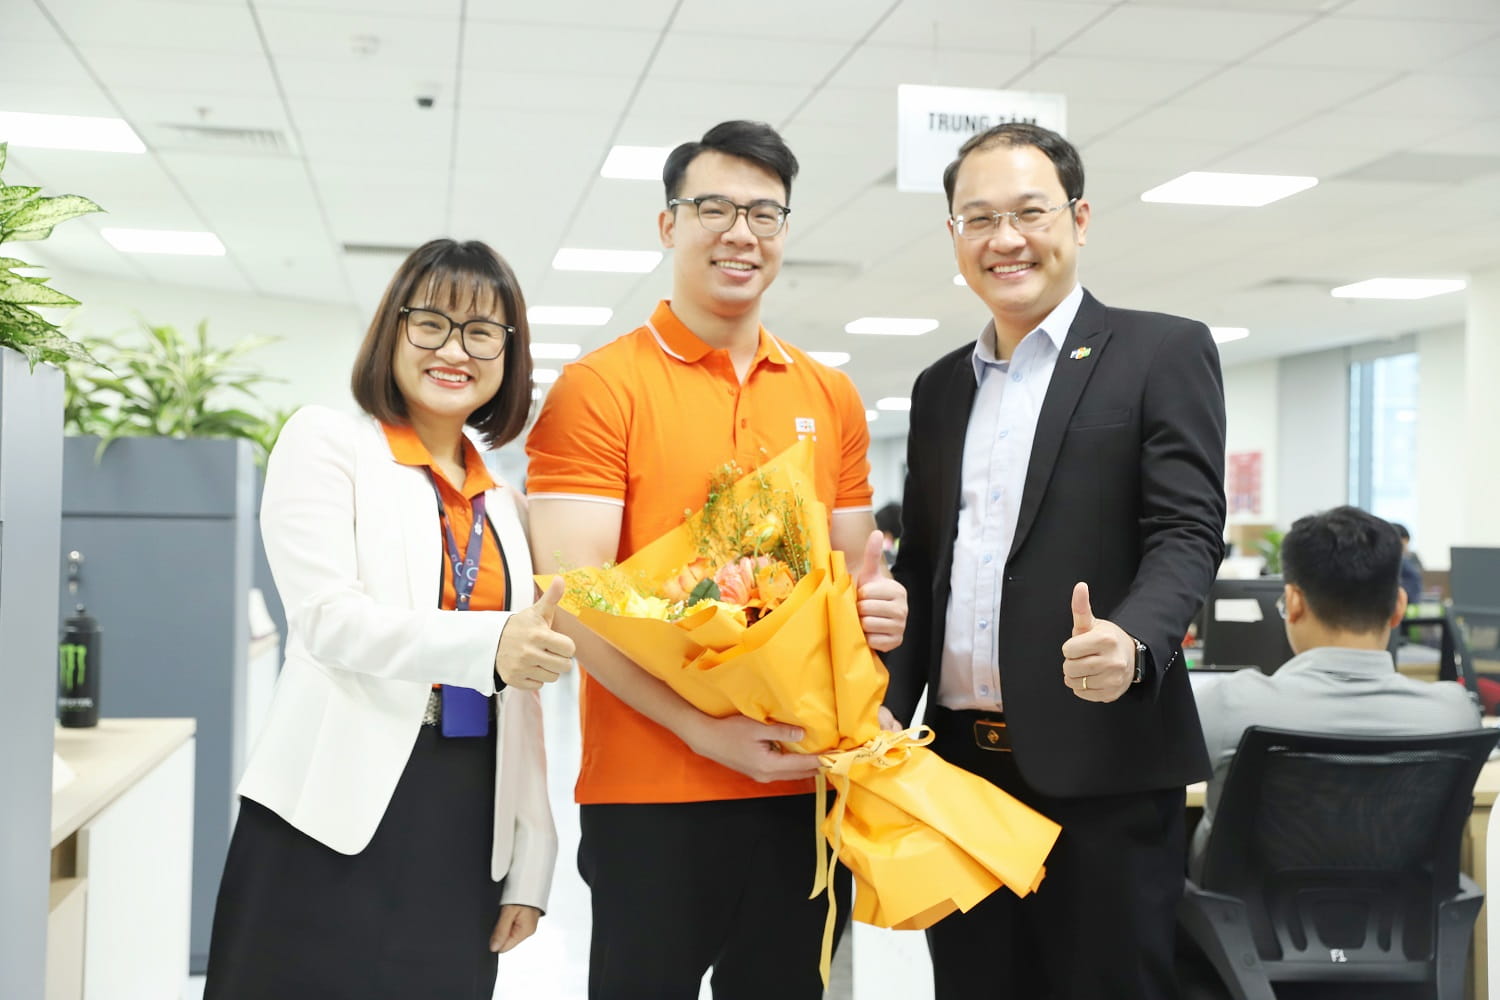 FPT's 60,001st employee, Mr. Nguyen Trong Duc, born in 1995 (middle), joined FPT Telecom in Hanoi.